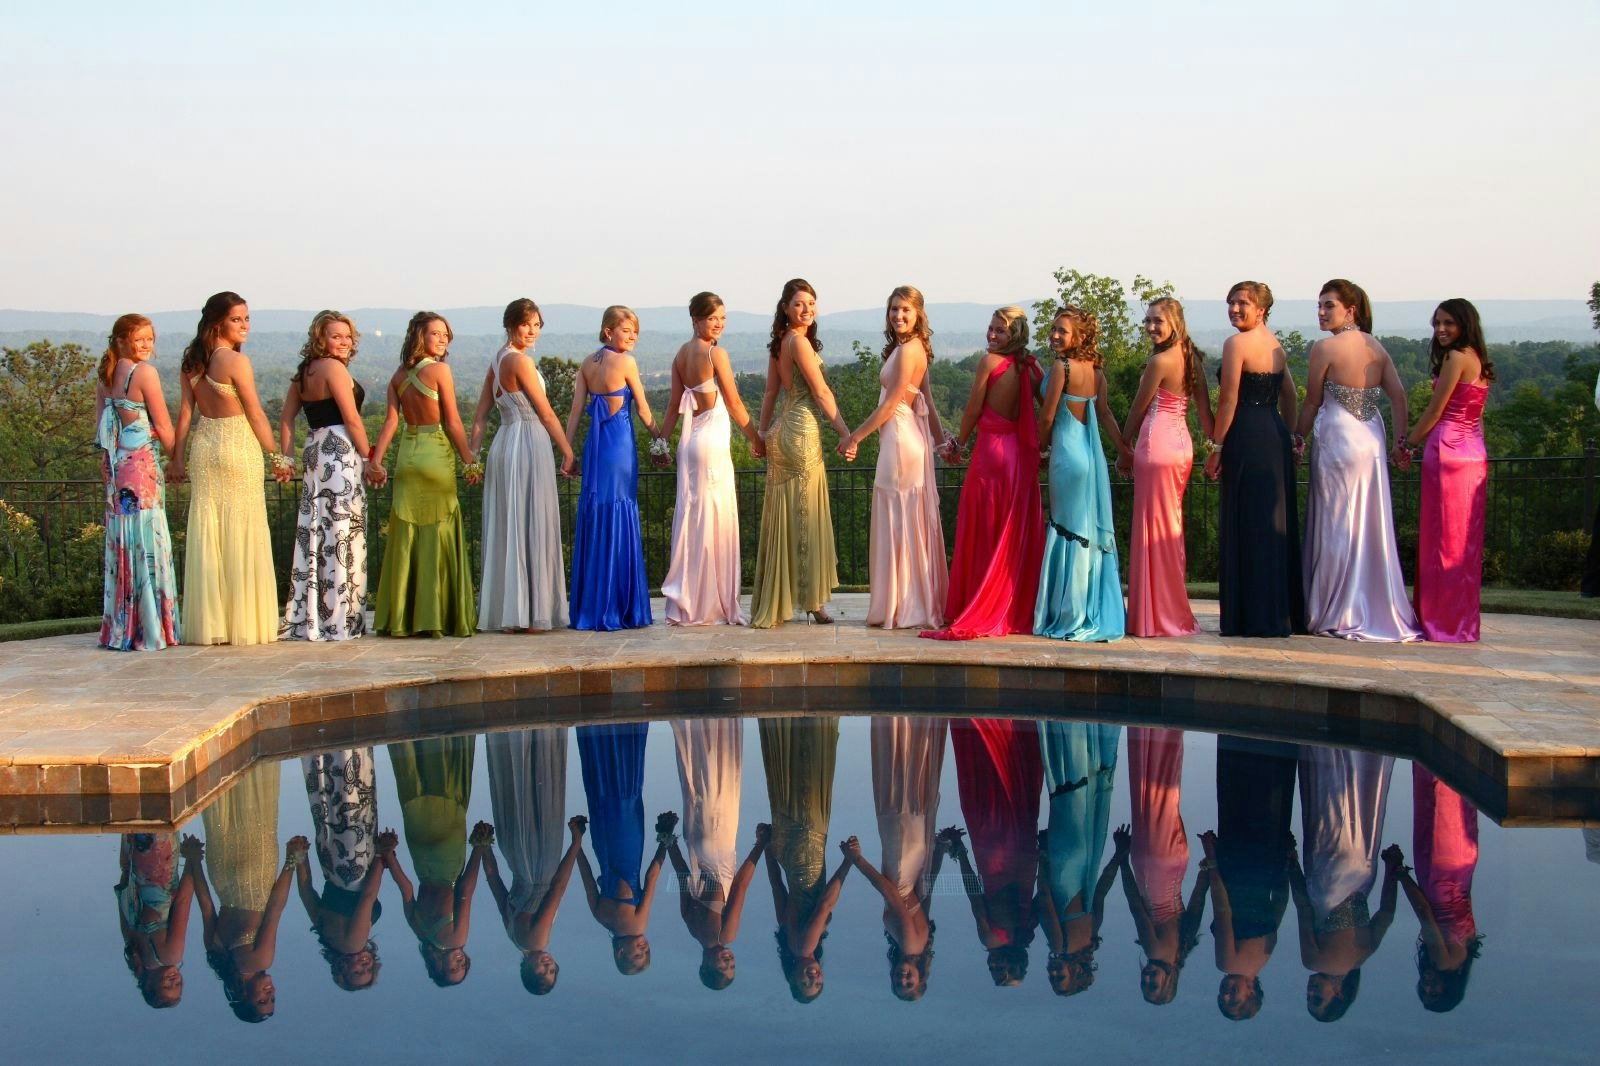 17 Prom Photo Poses to Take on The Big Day